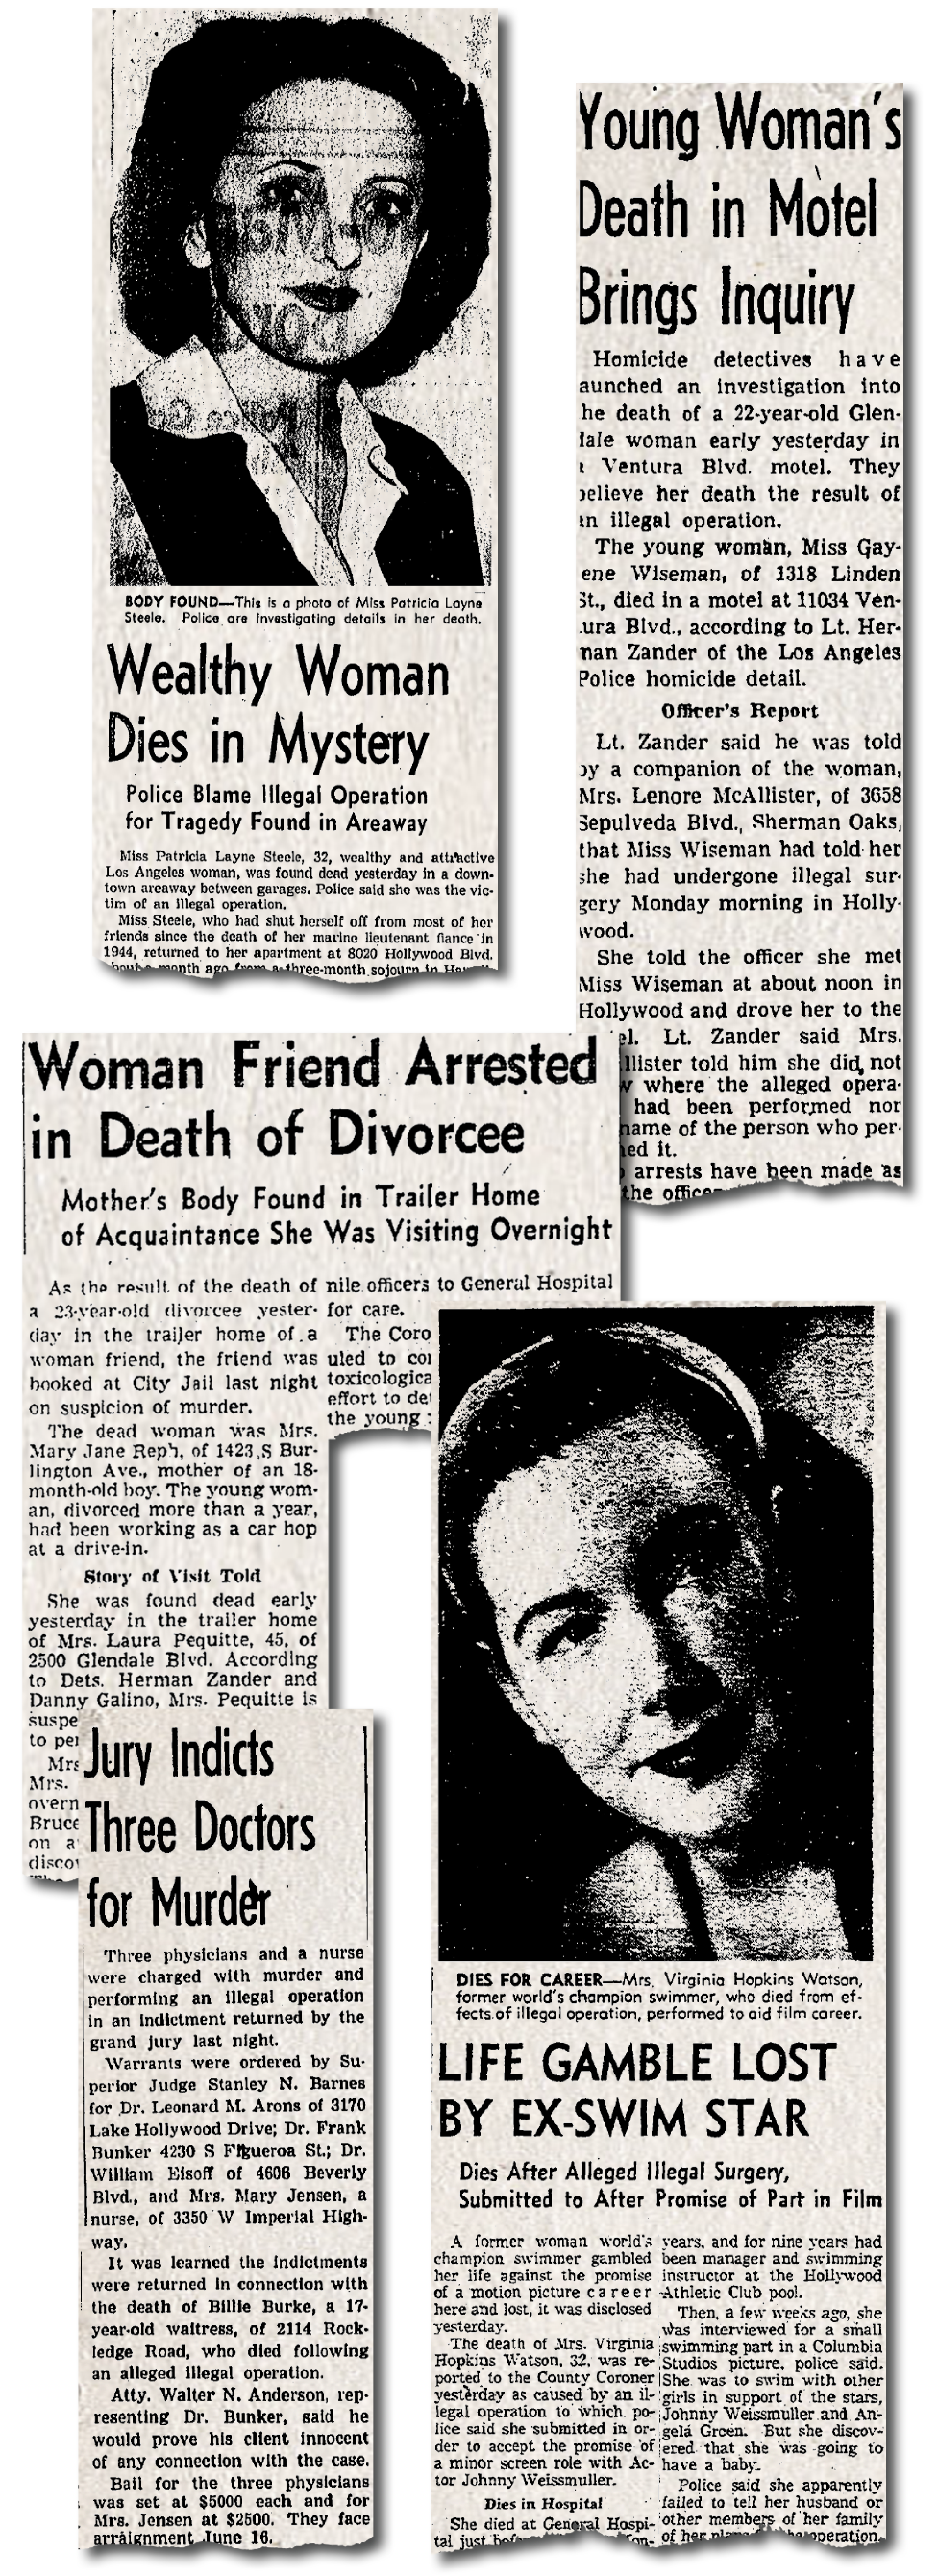 Newspaper clippings showing women who died after illegal abortions